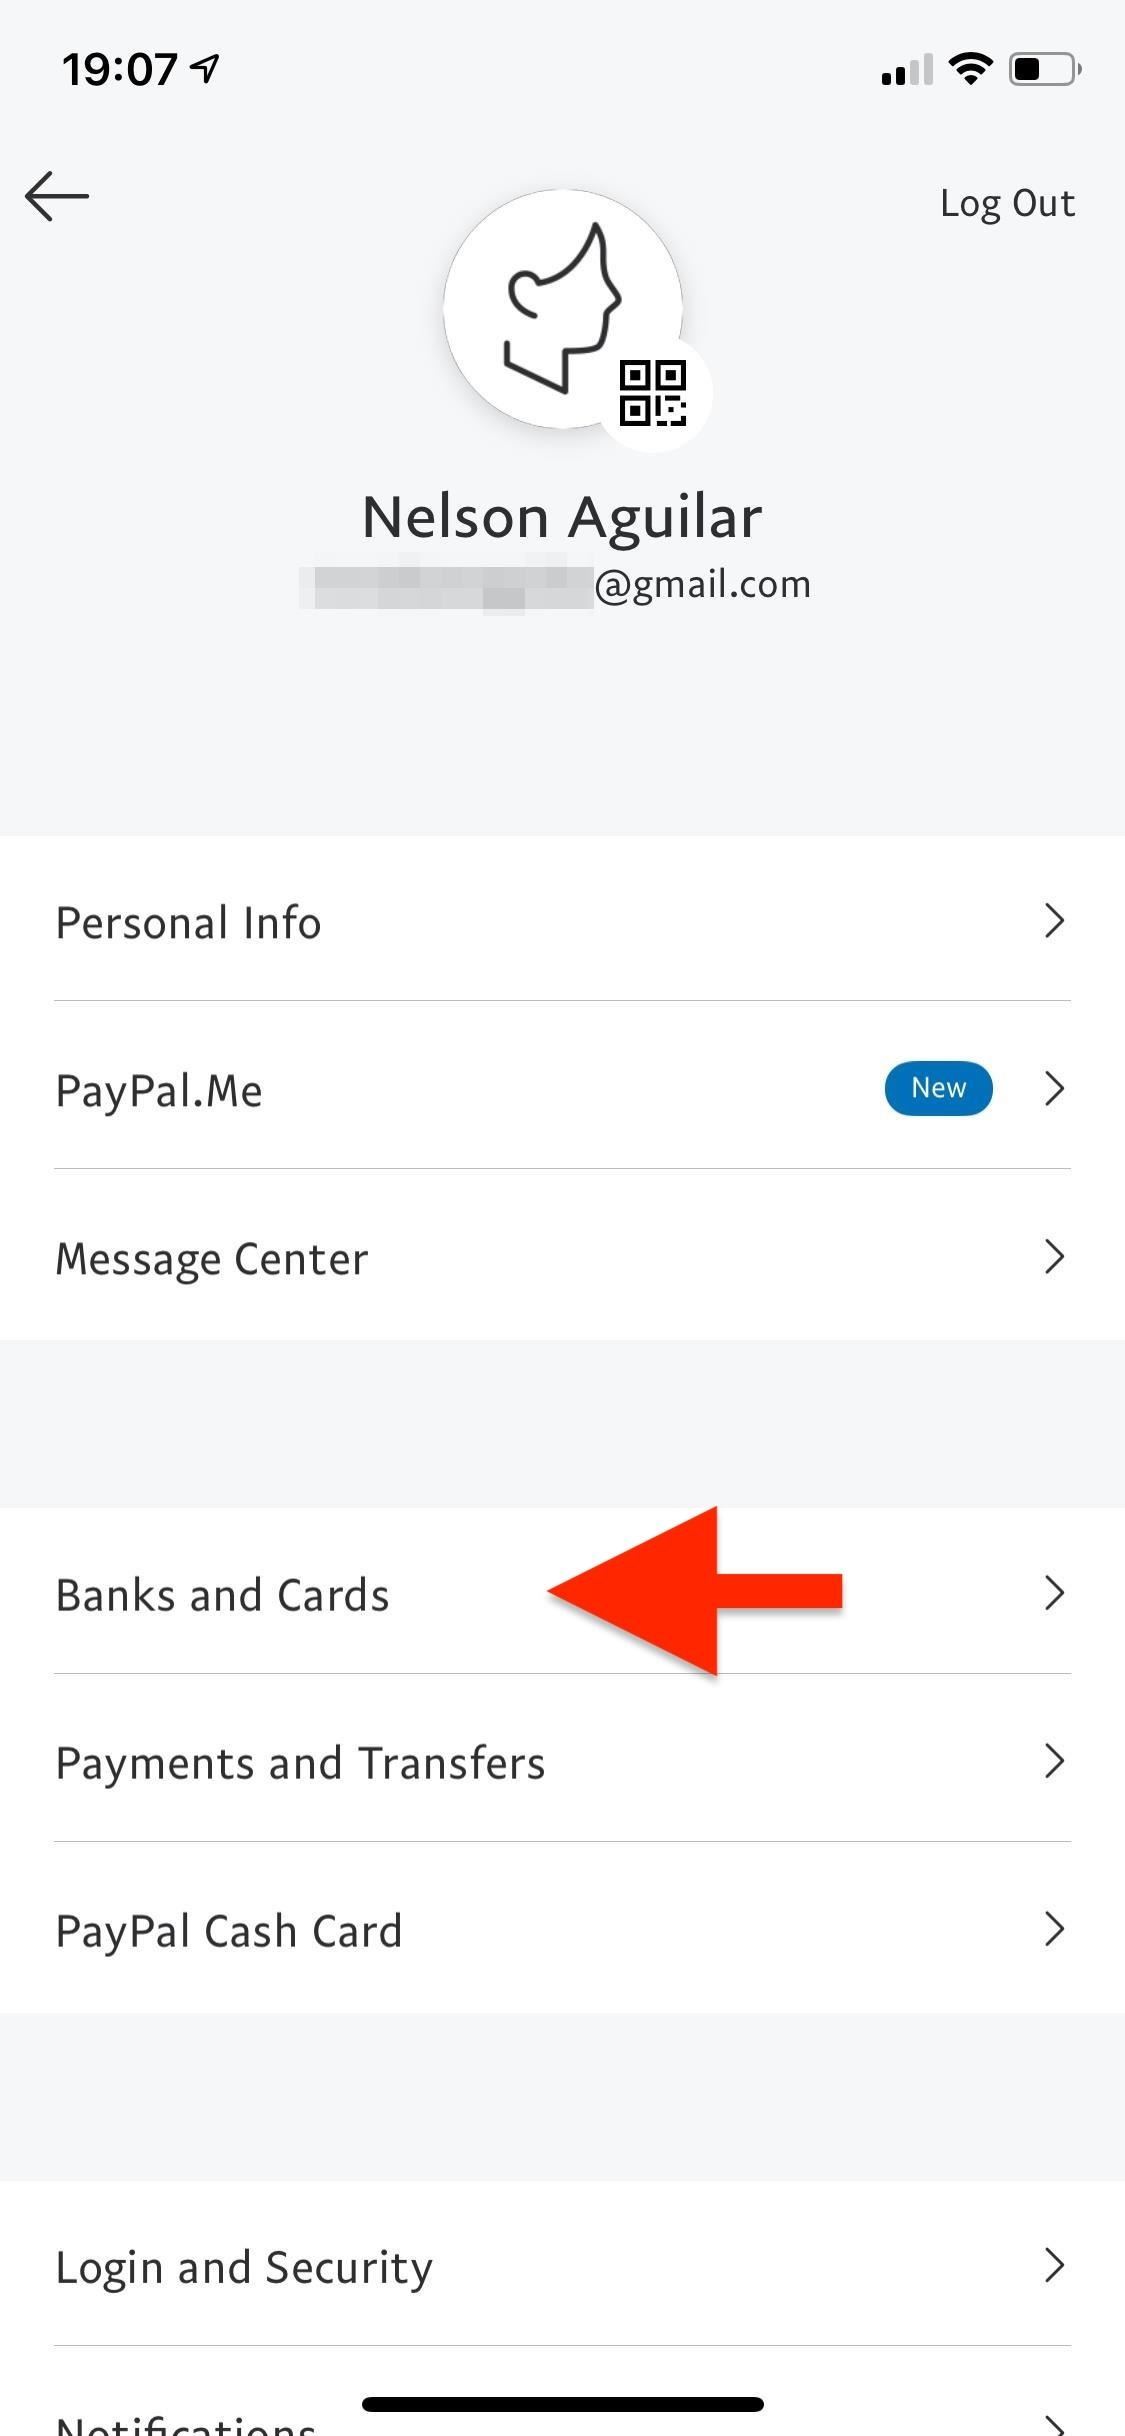 How to Link Your Debit Card to Your PayPal Account | Finder Canada